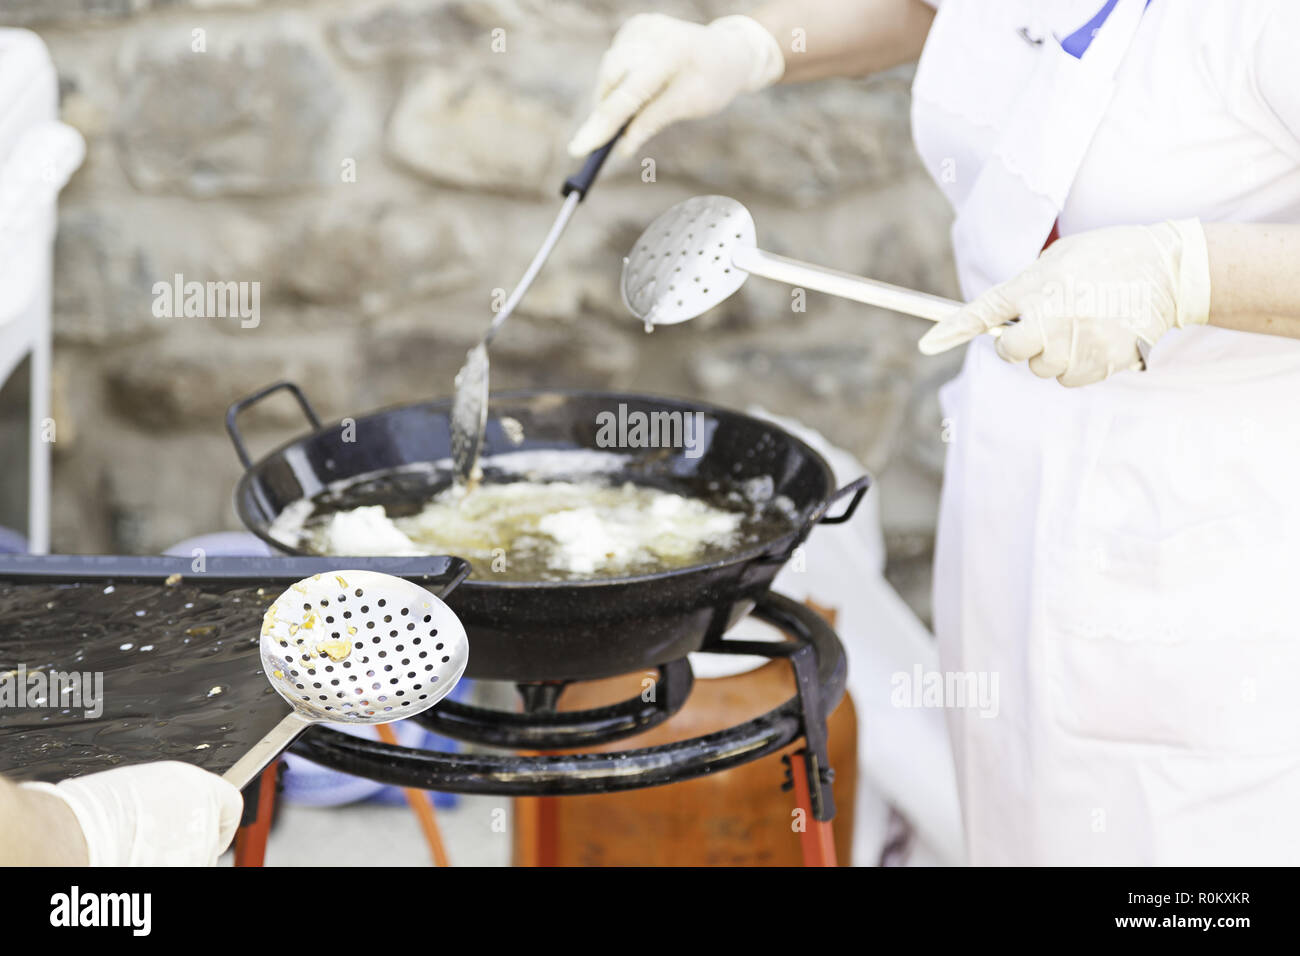 Fry eggs, detail of a women on the street cooking eggs, hot oil Stock Photo